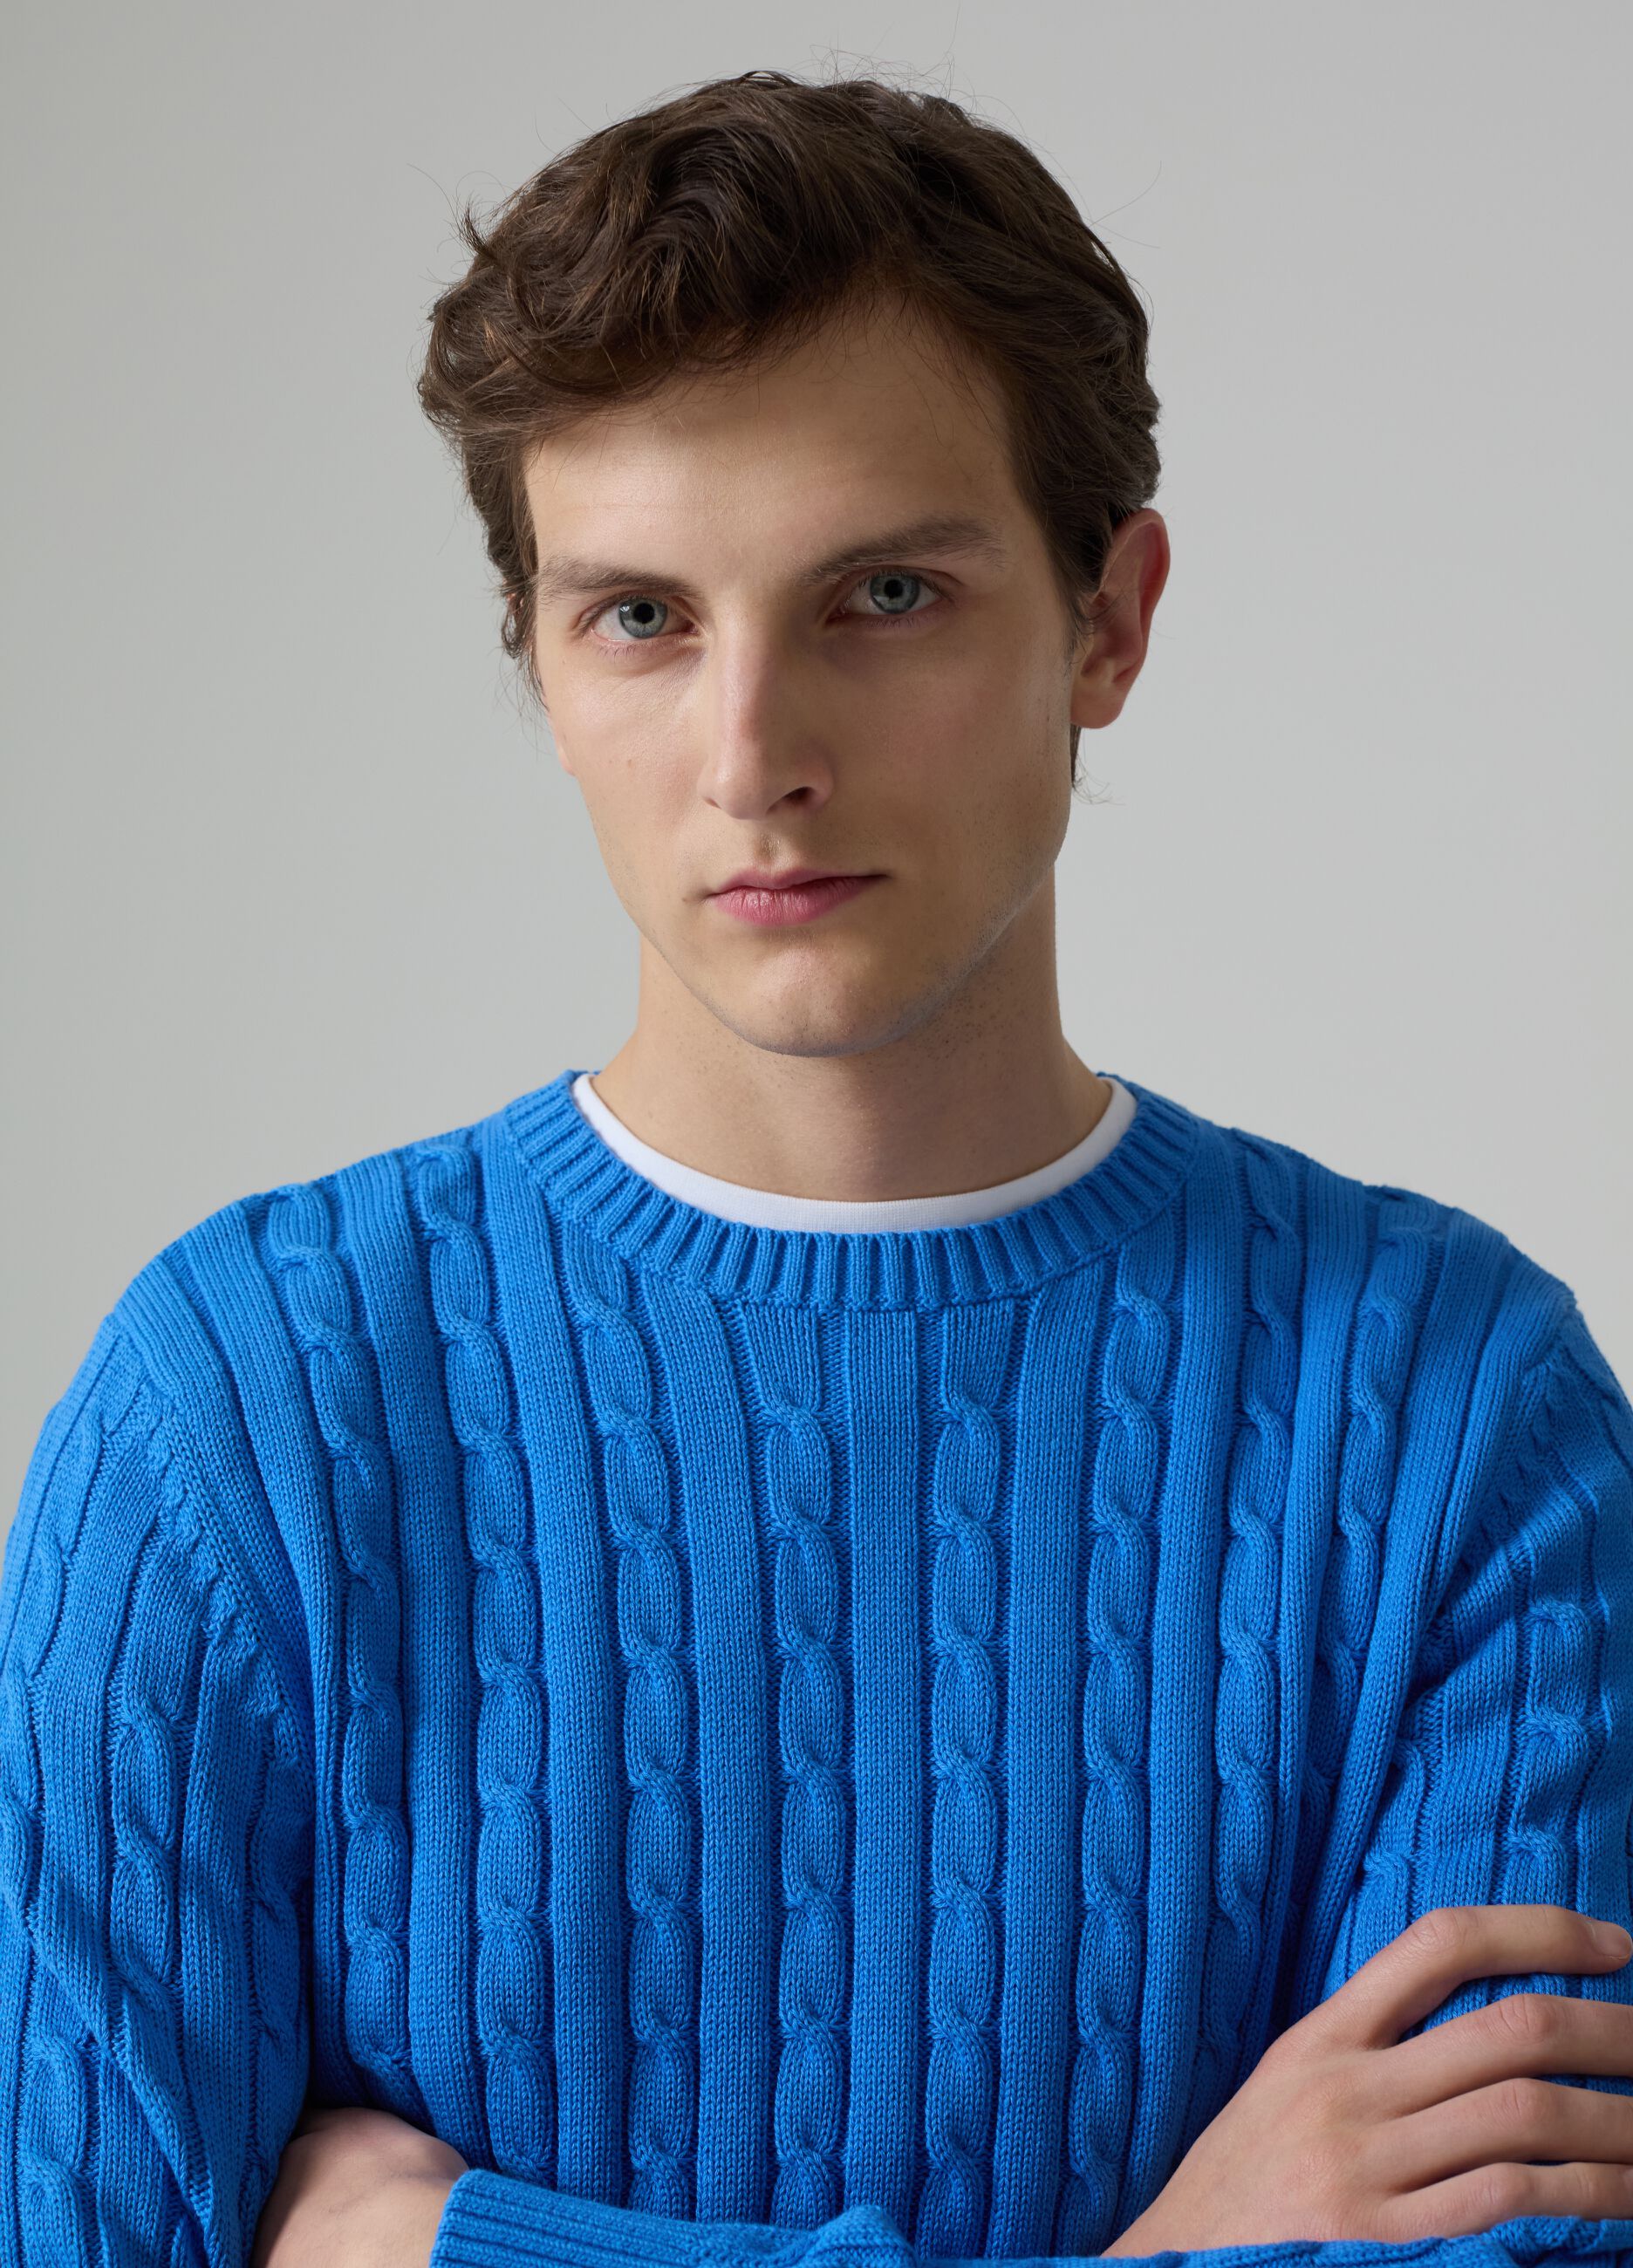 Ribbed pullover with cable-knit motif